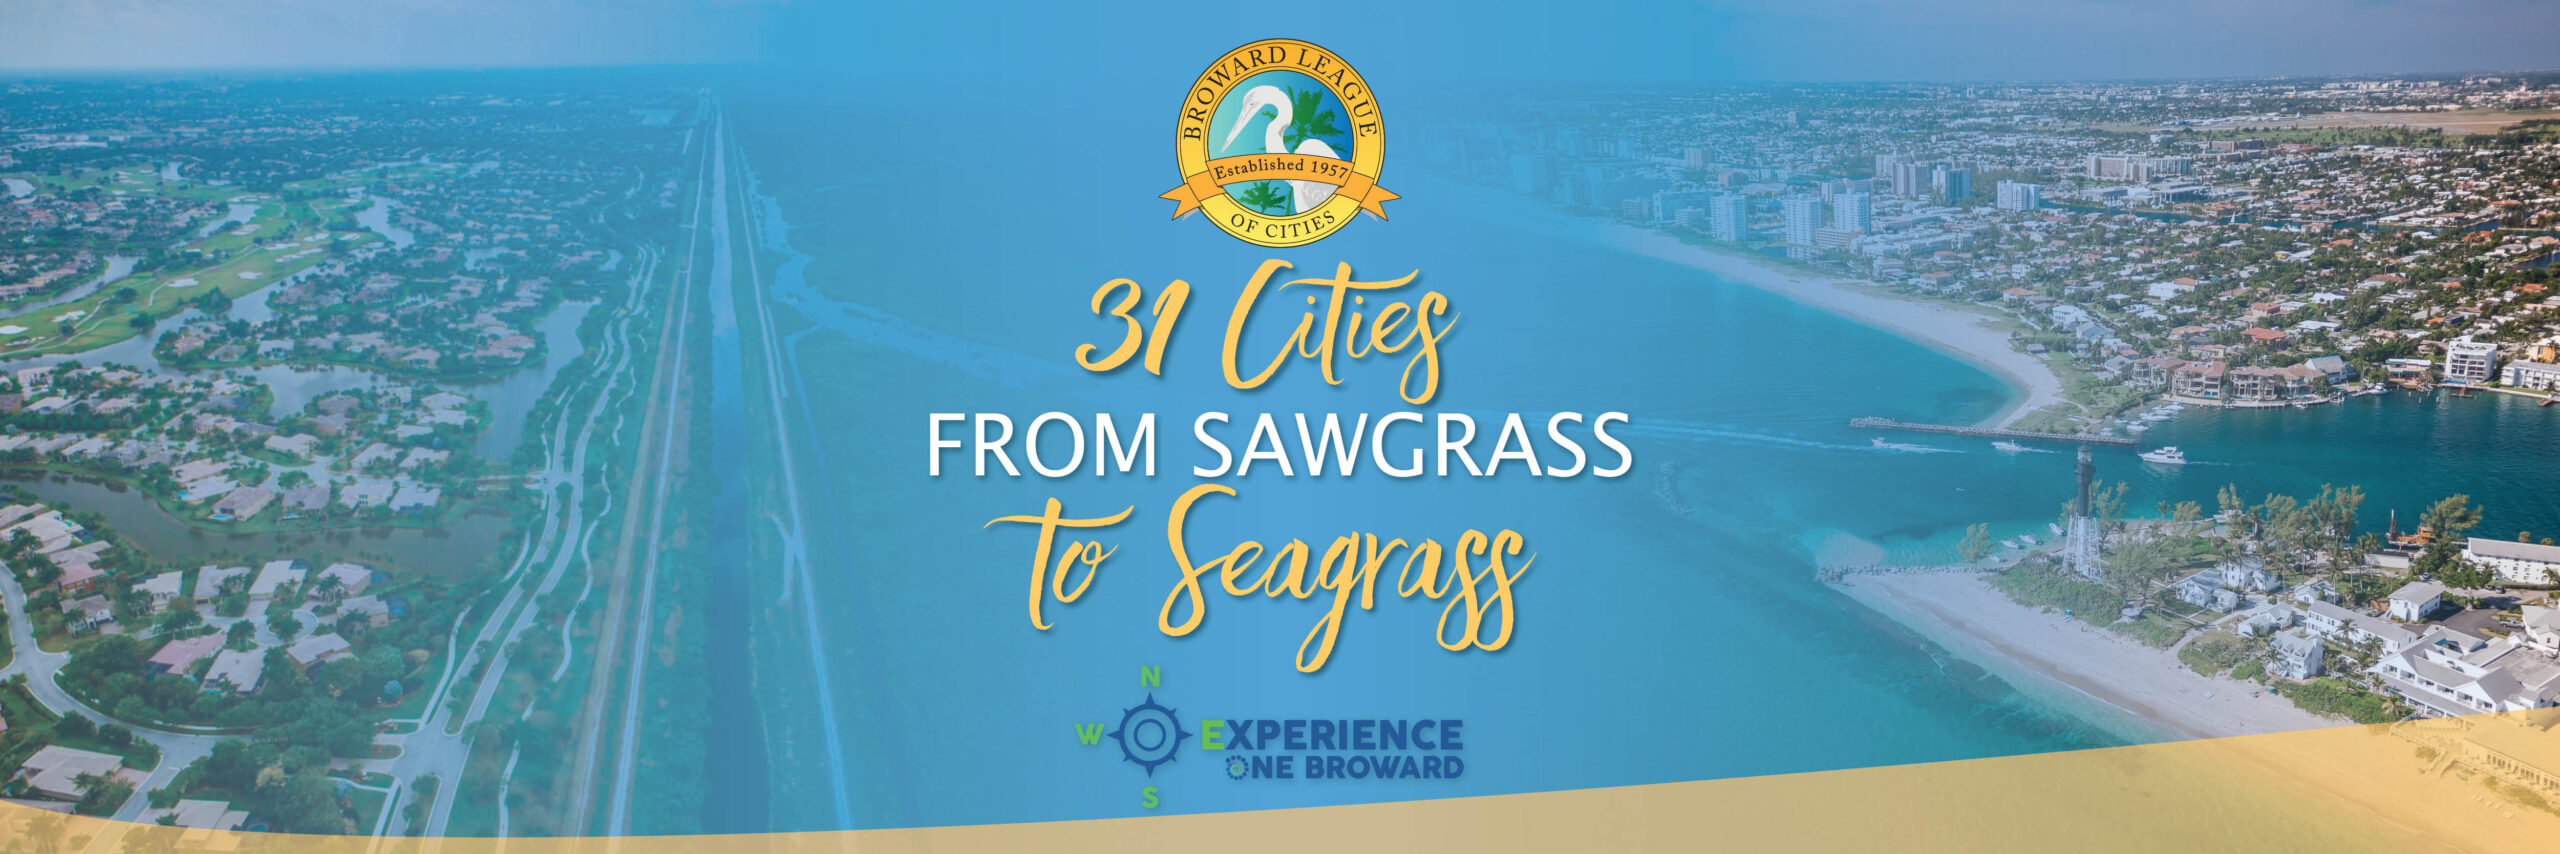 31 Cities from Sawgrass to Seagrass